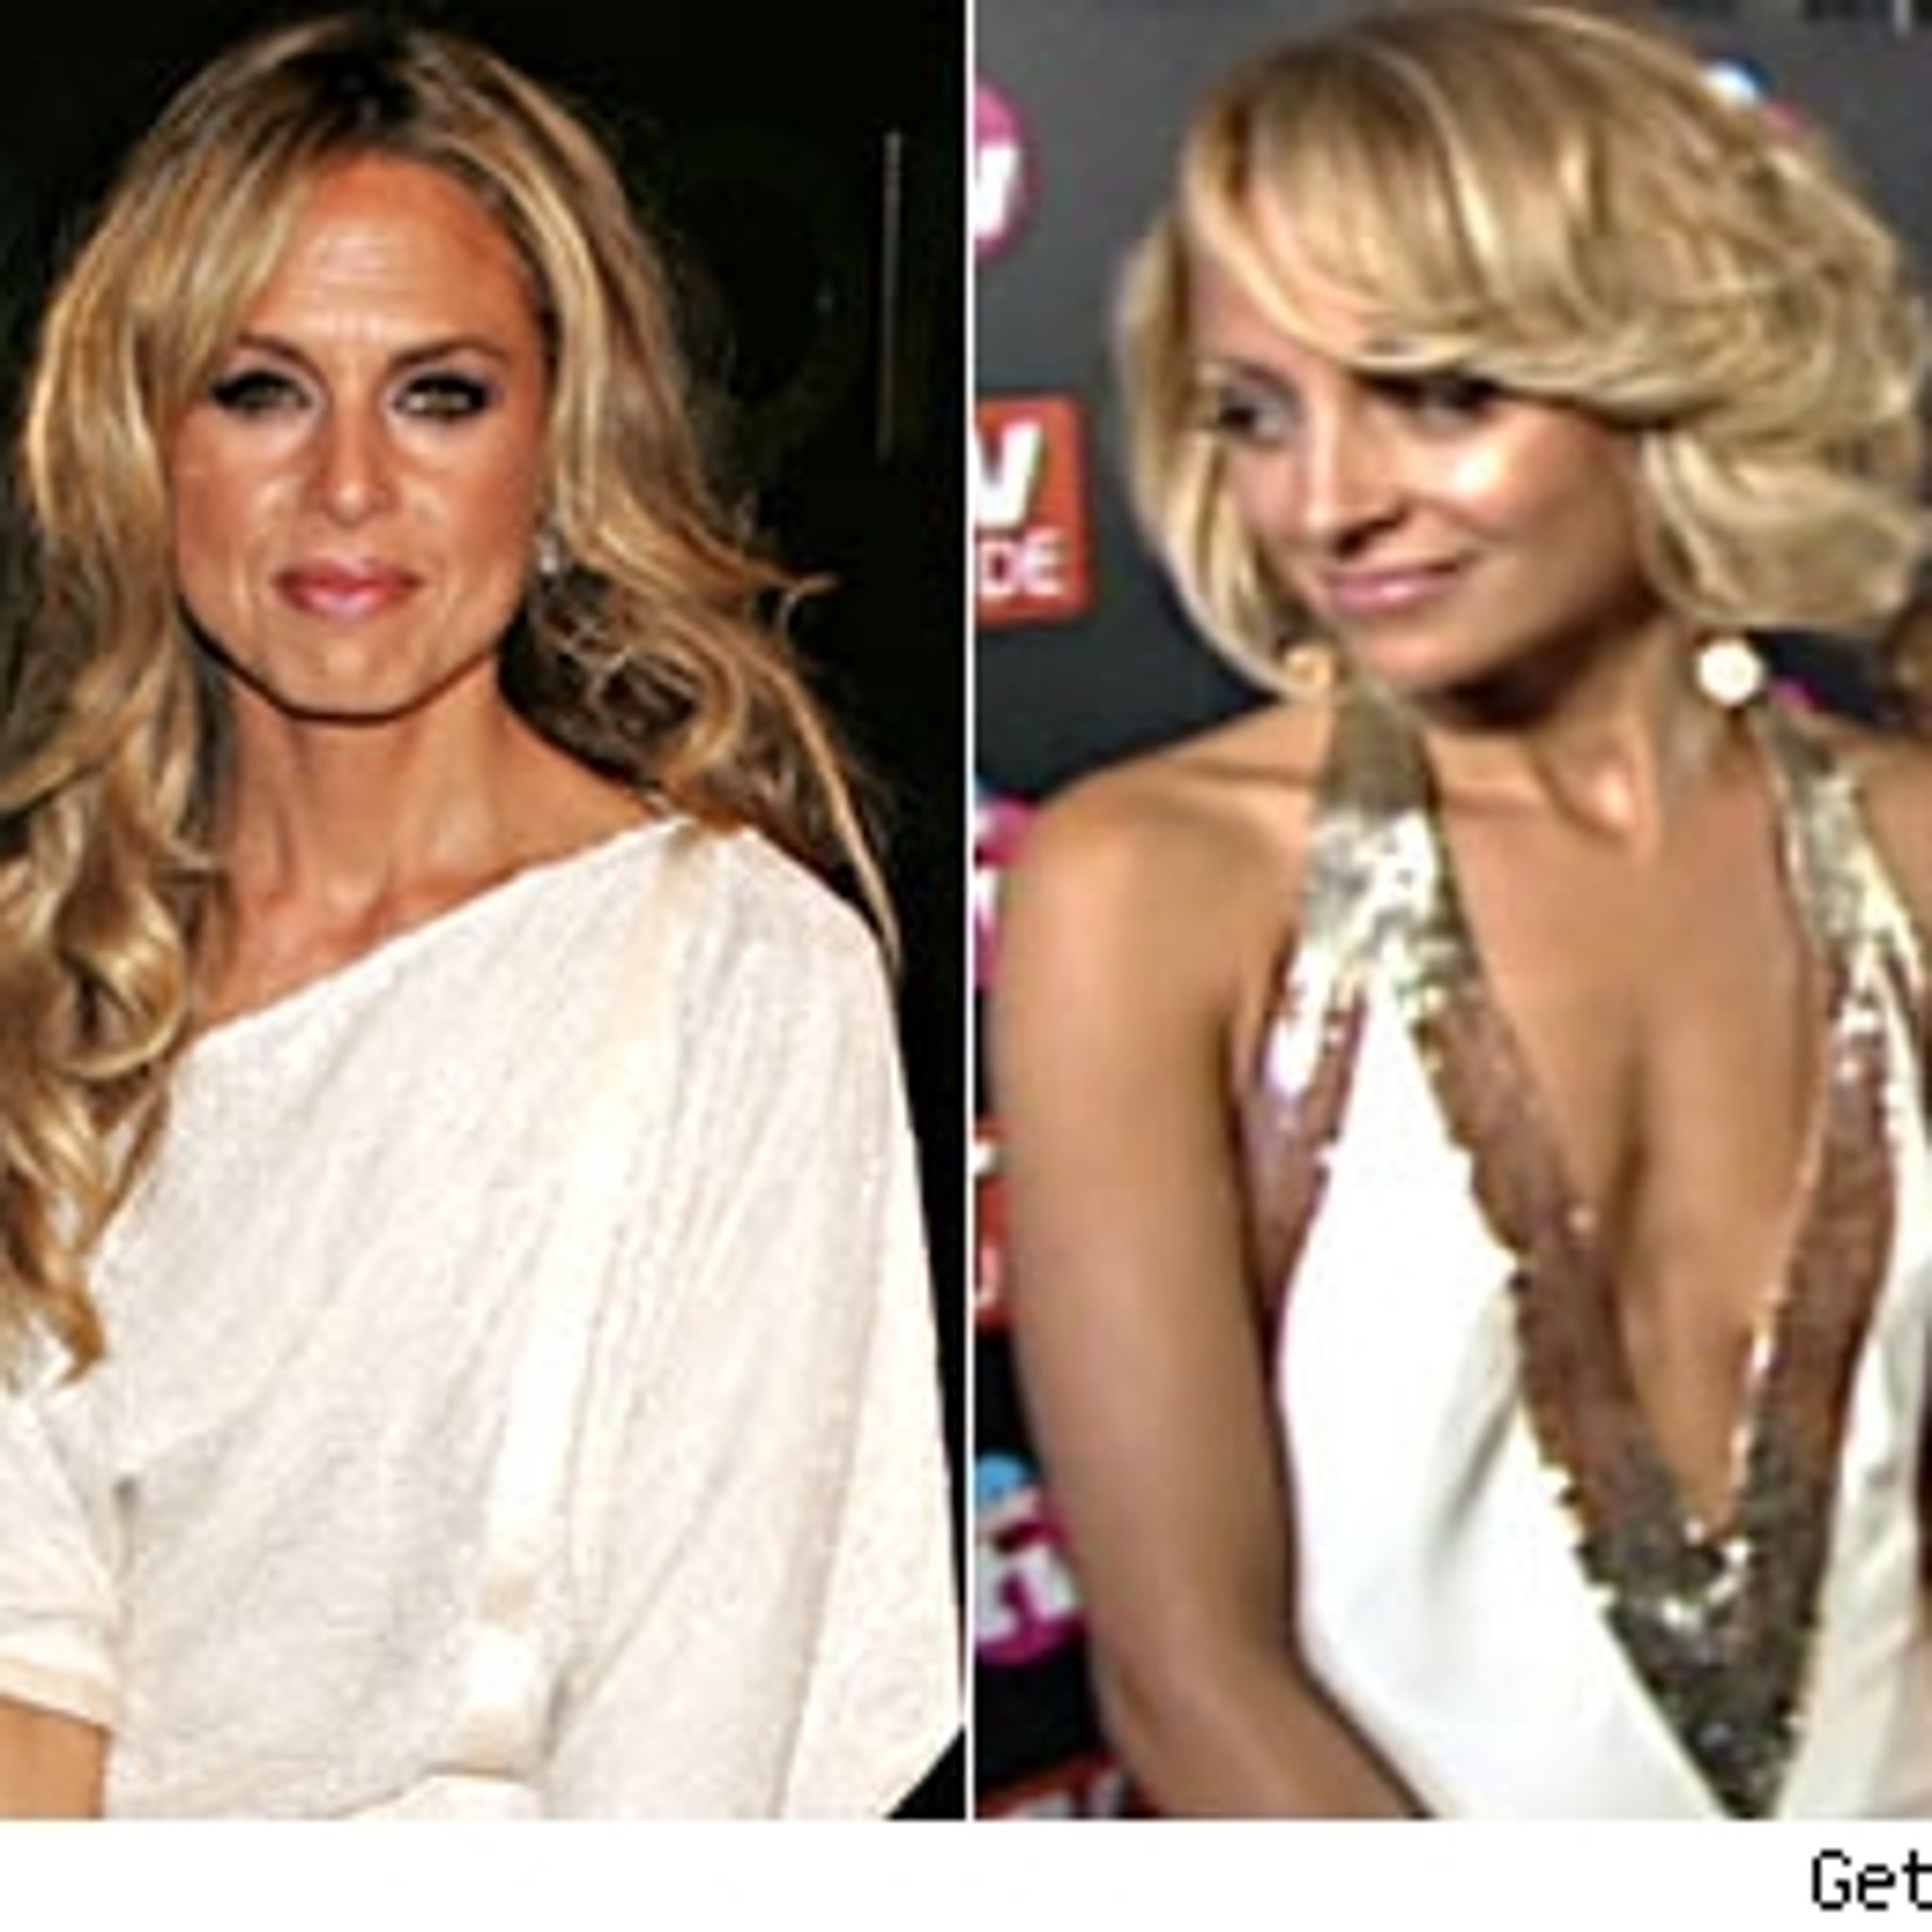 Rachel Zoe and Nicole Richie during Movieline Hollywood Life's